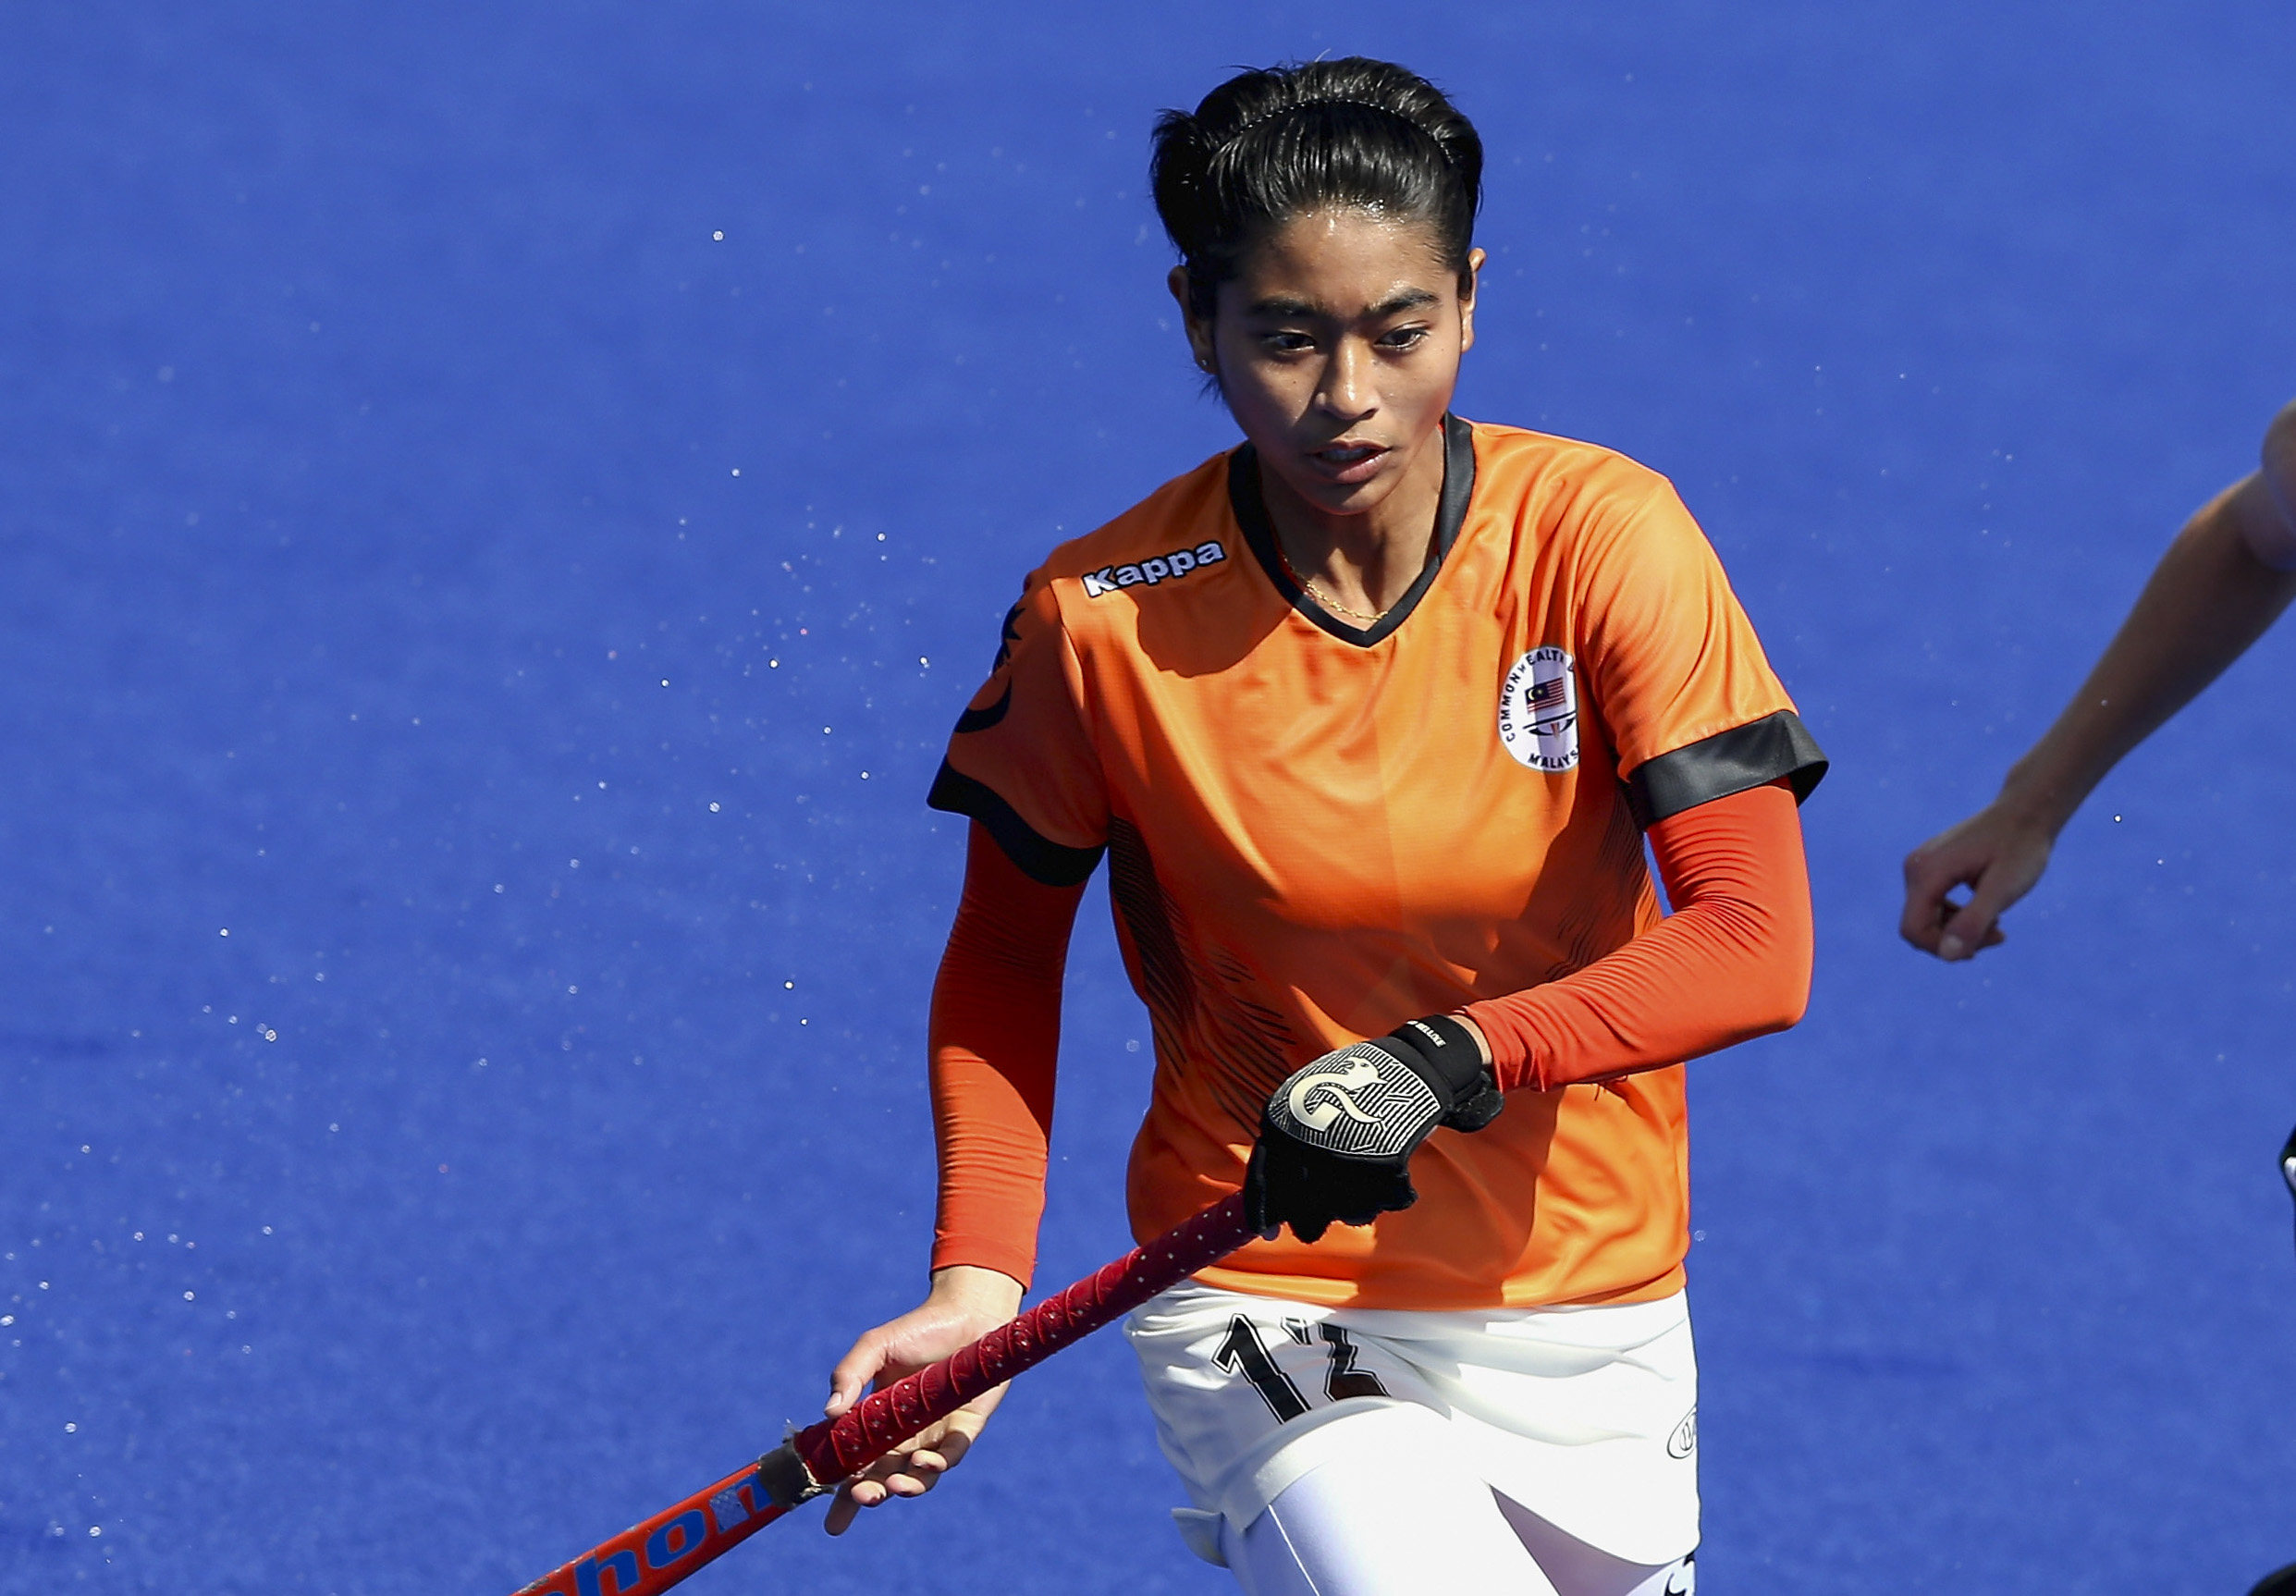 Svag slids ribben Malaysia bans star hockey player from national duty over racist Instagram  comment | South China Morning Post